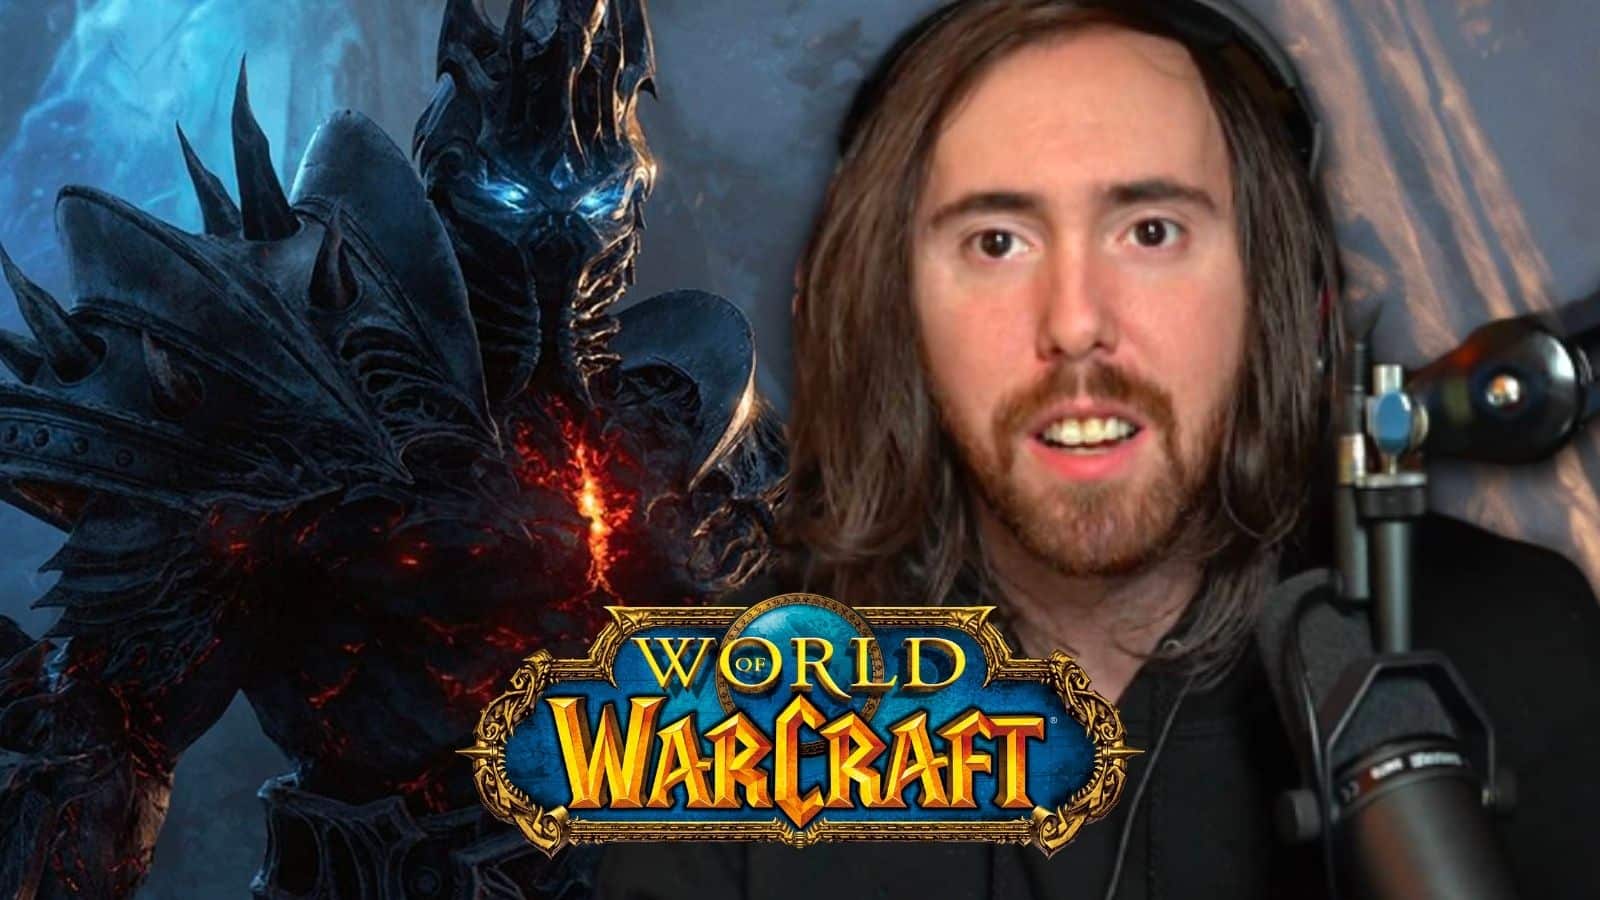 asmongold with wow expansion character